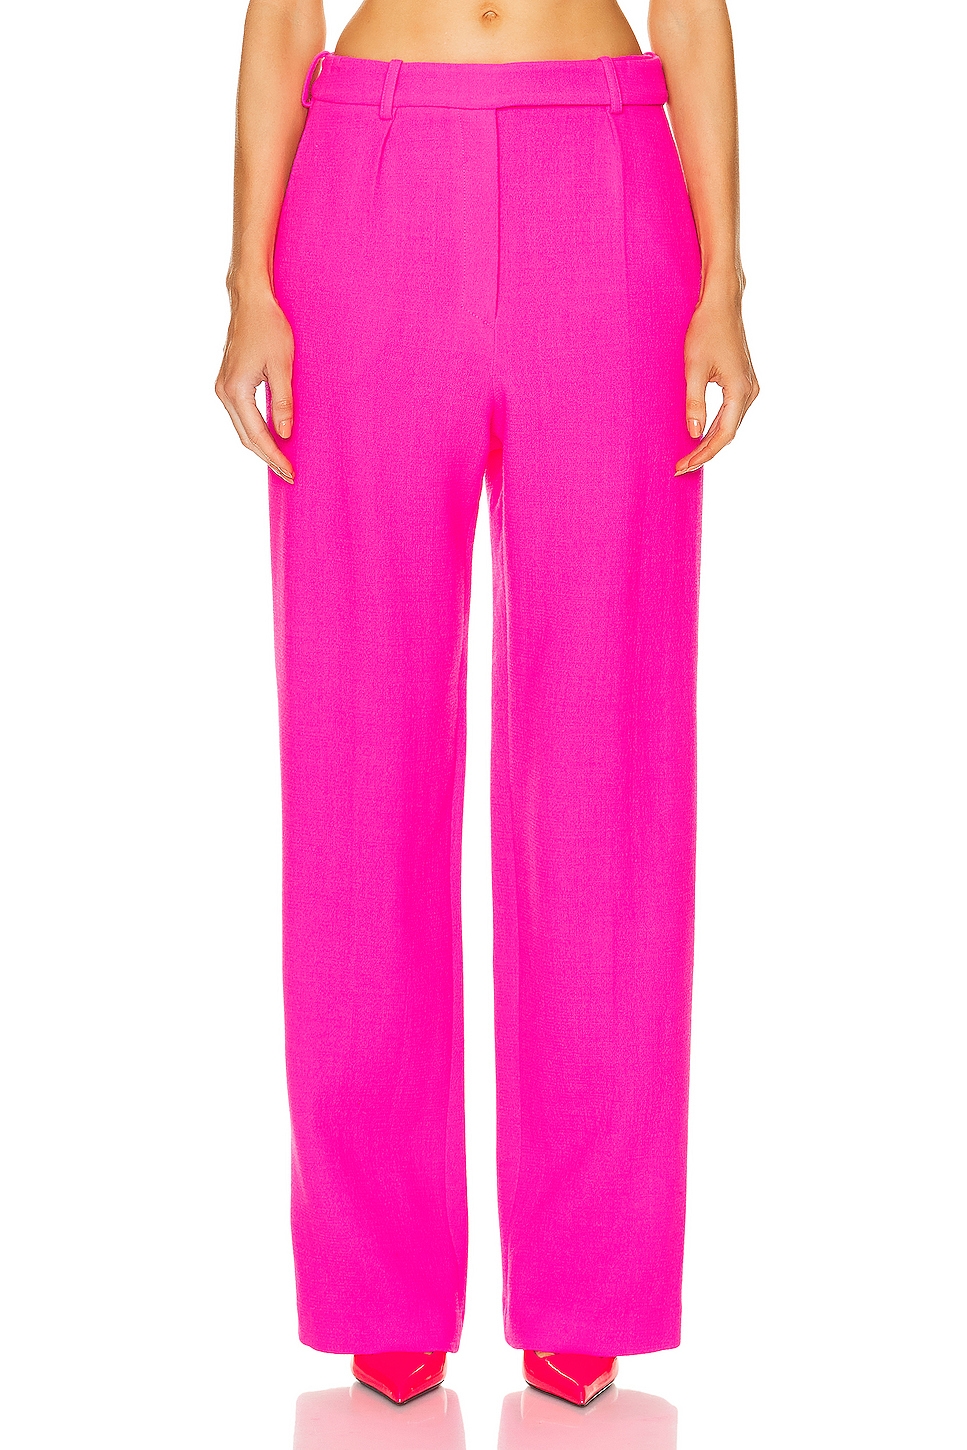 Image 1 of Alexandre Vauthier Large Pant in Neon Pink